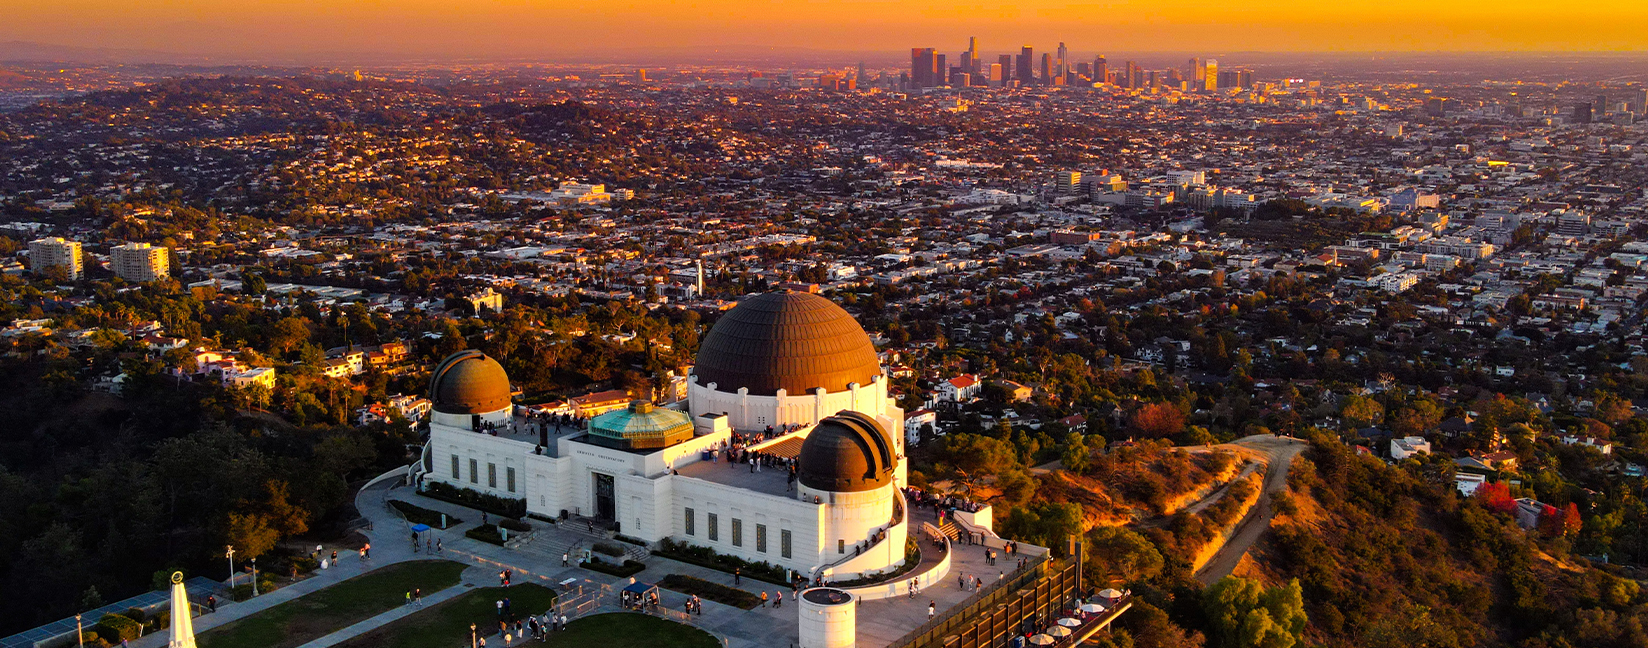 Los Angeles Best Vacation